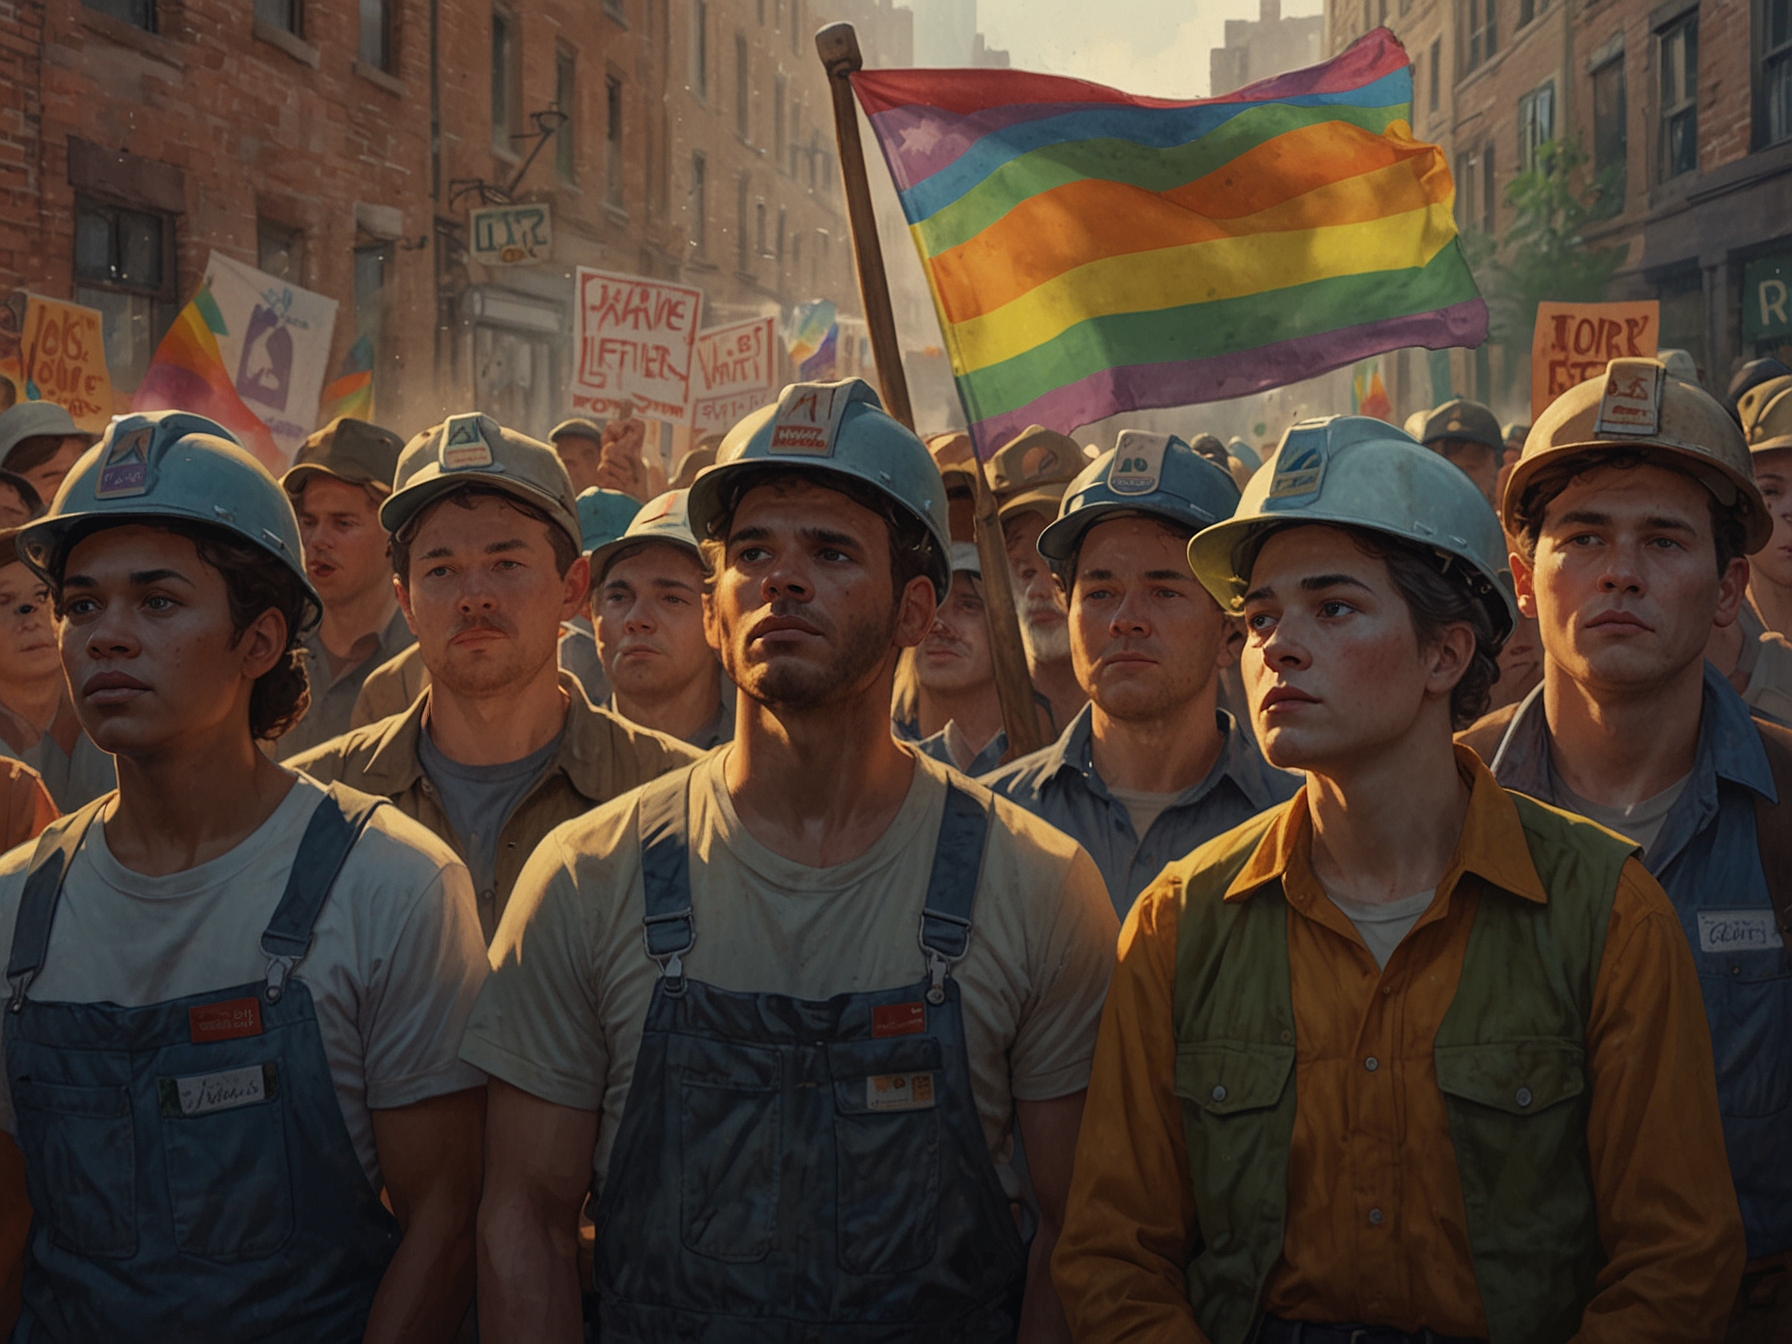 A still from 'Pride' featuring LGBTQ+ activists and miners standing together in solidarity, capturing the film's central theme of unity amidst adversity.